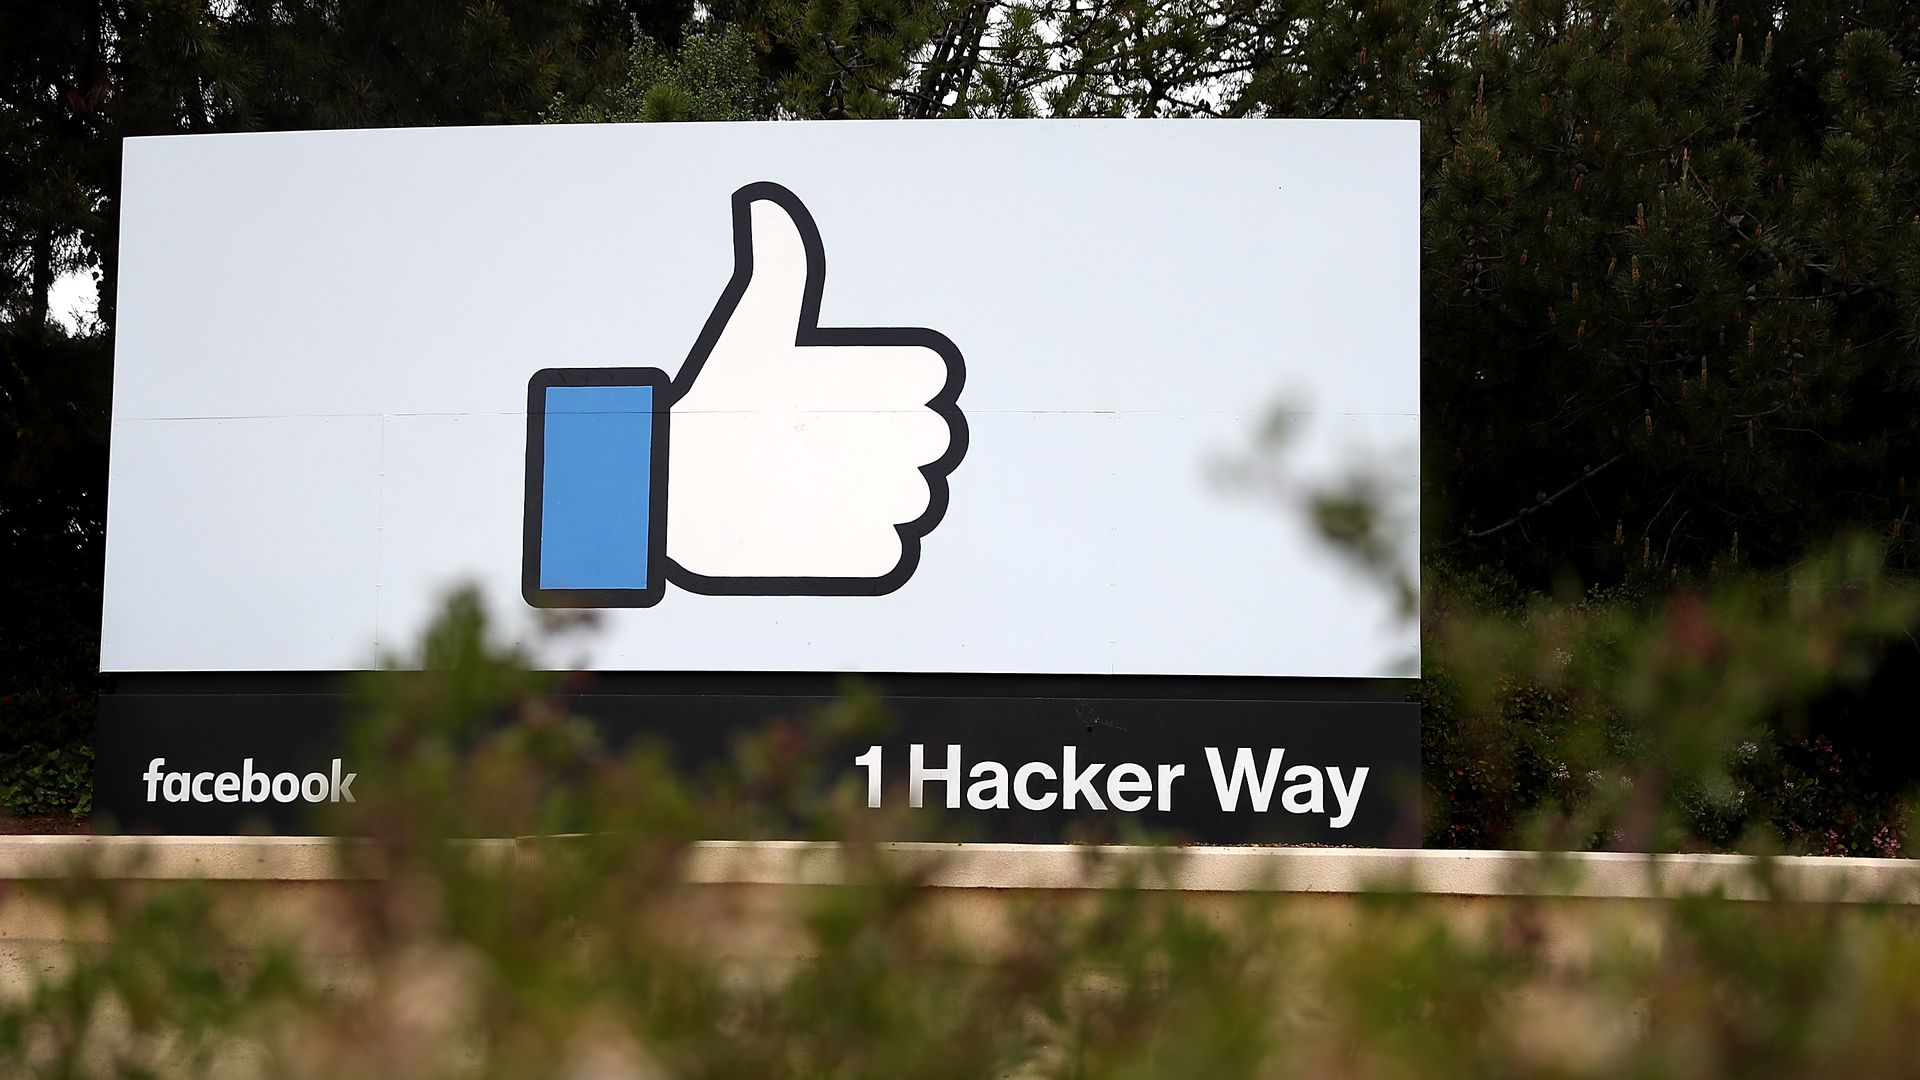 The thumbs up sign outside of Facebook headquartes